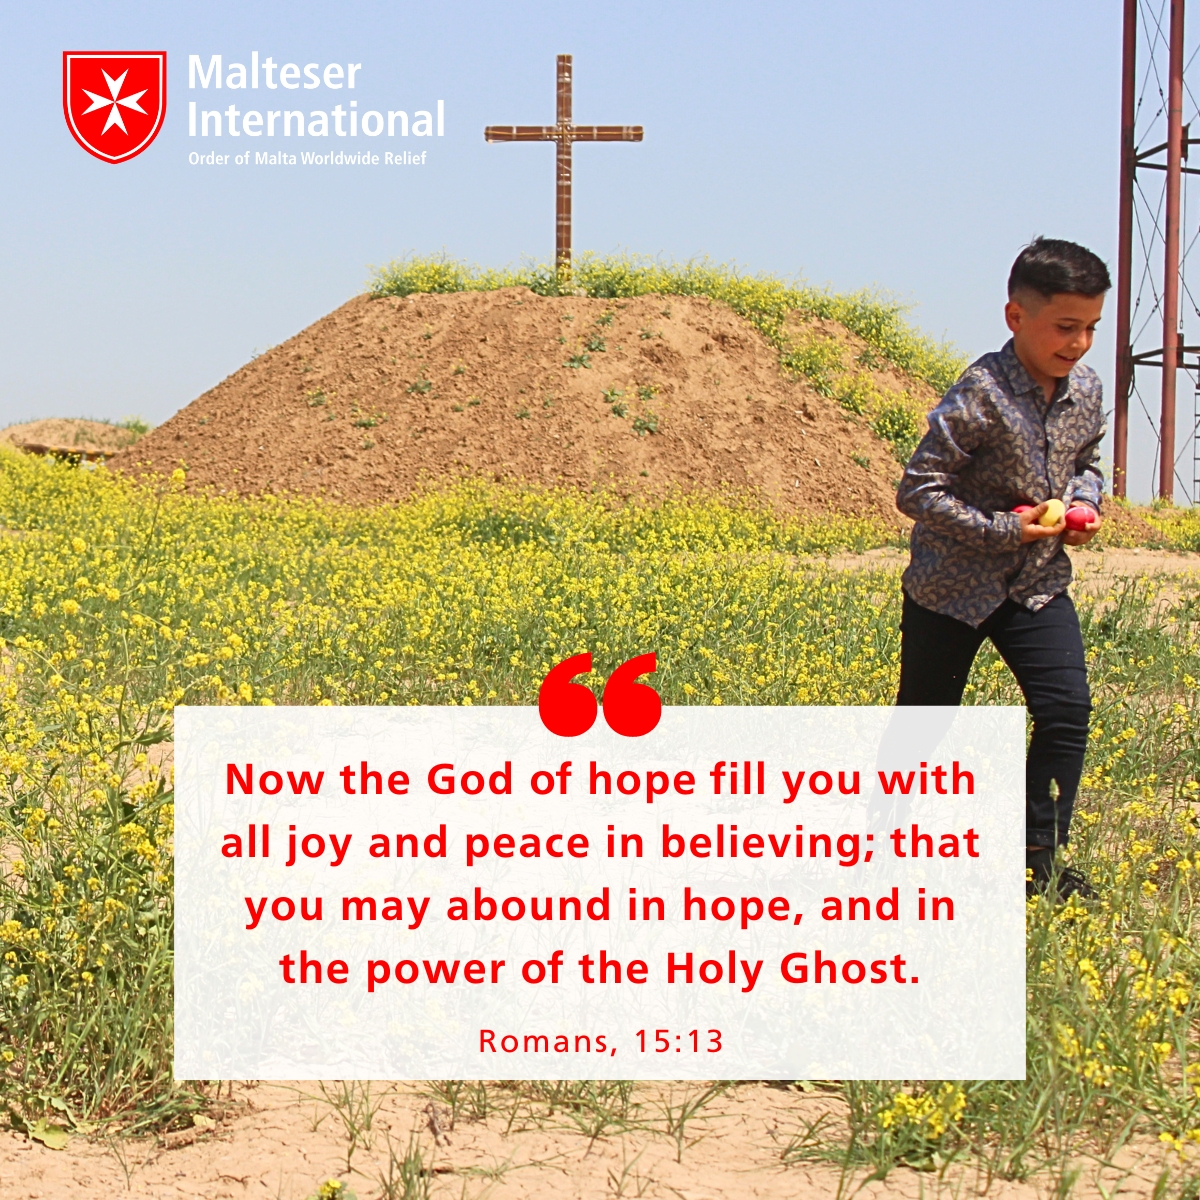 🕊️ Let us spread hope and joy on these Easter days, continuing to serve those in need. #MalteserInternational #Easter #SpreadingHope #HumanitarianAid